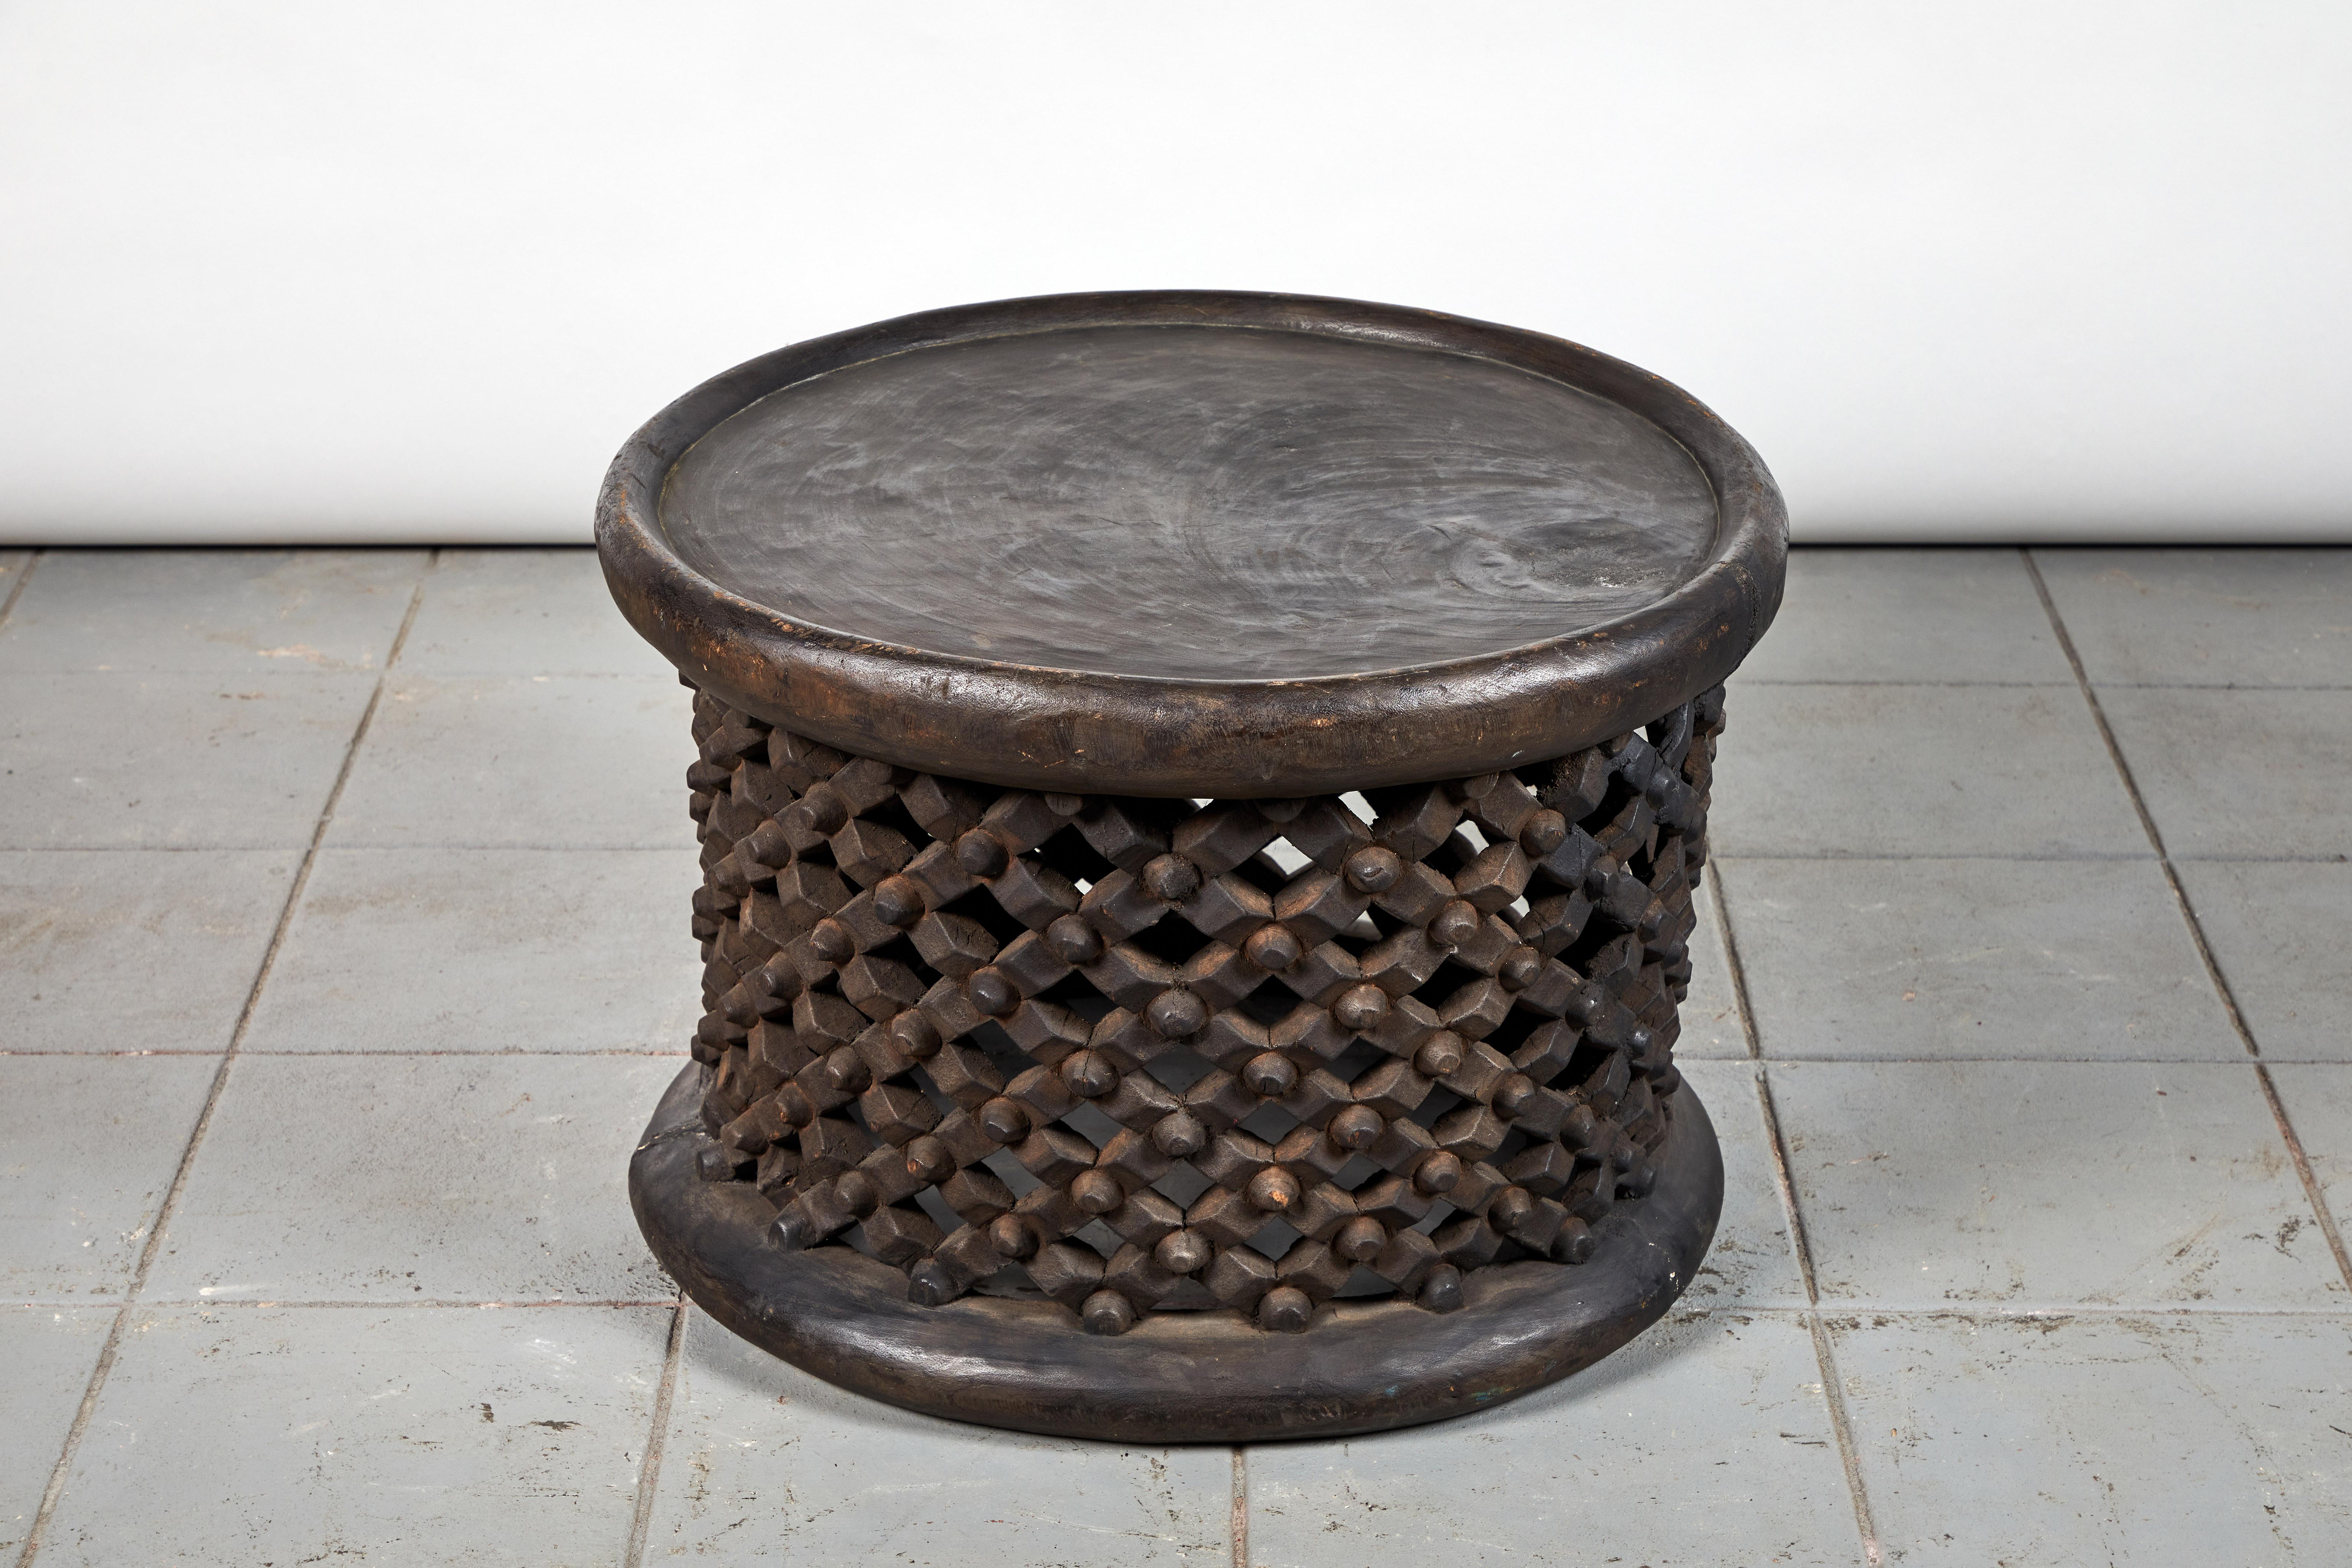 A Cameroon wood drum table with pierced and carved lattice base. The size and height is great to use as a stool, side table, or occasional table. The lattice work on the bench is in good condition, however, due to the inherent nature of solid wood